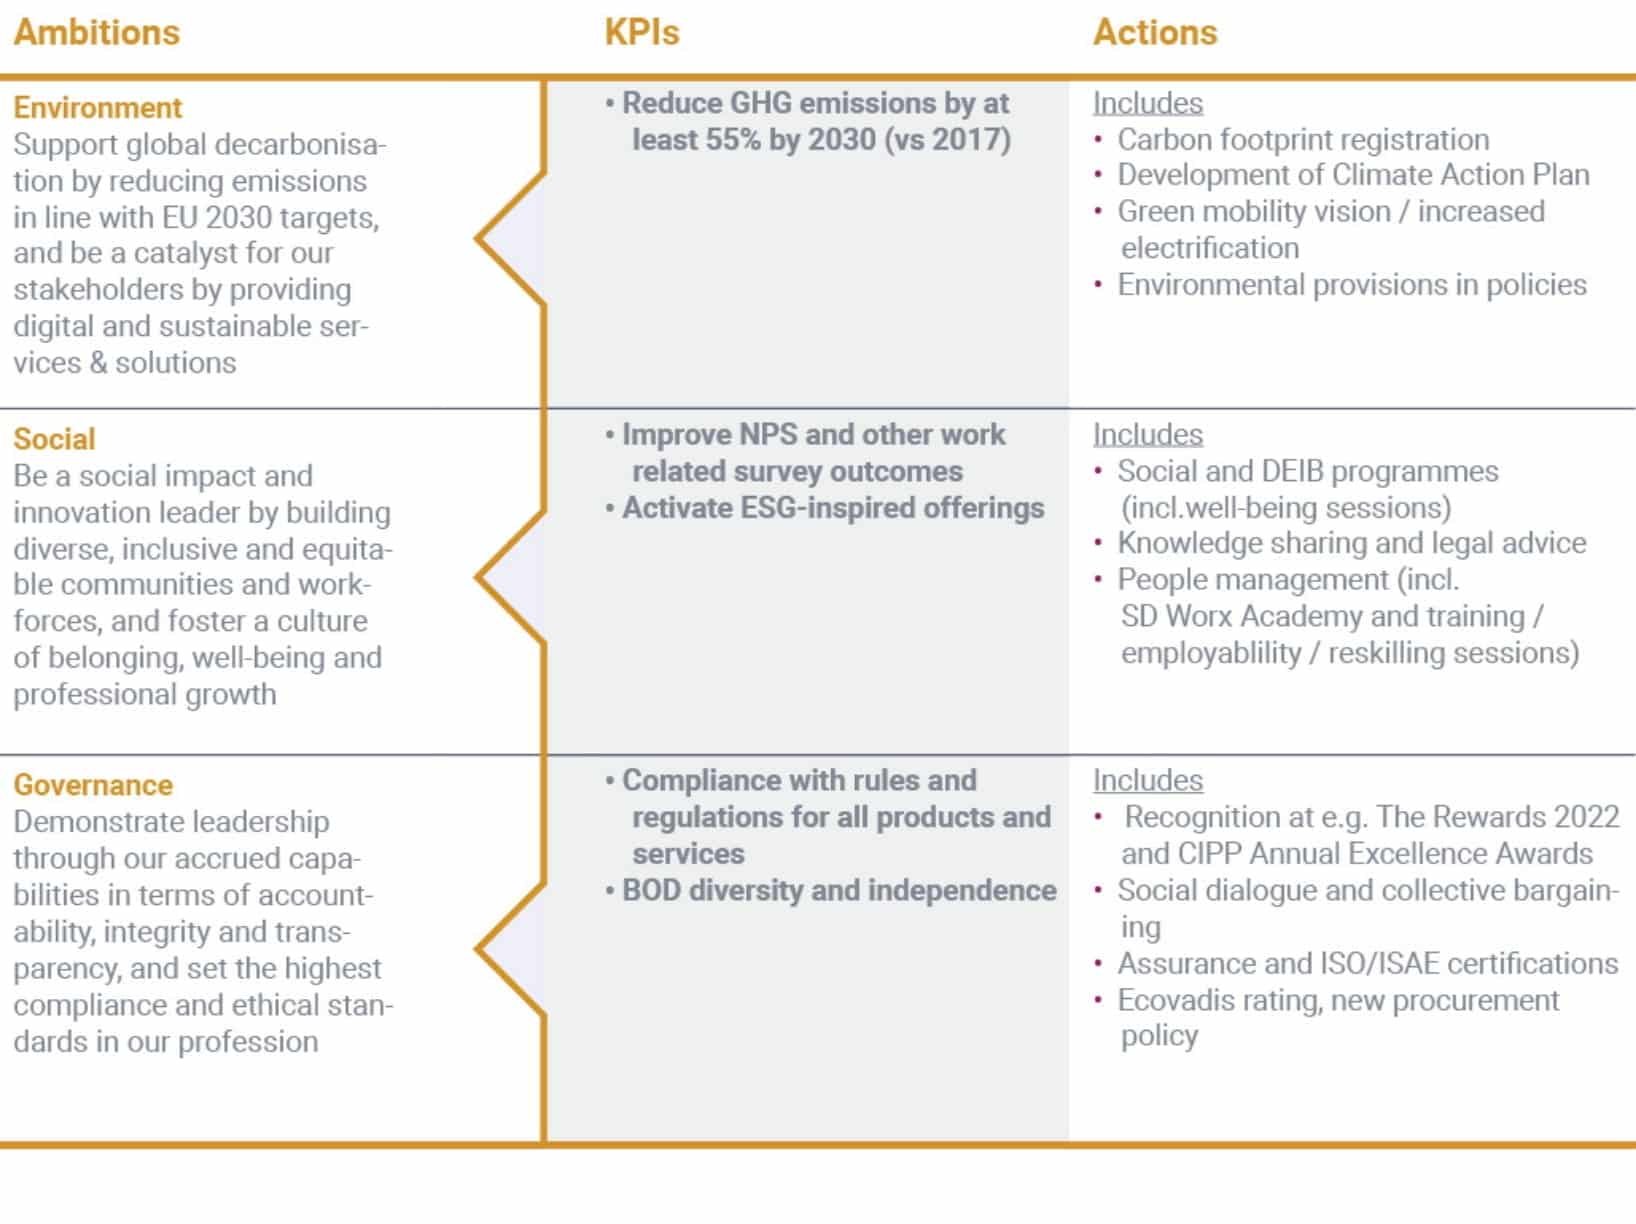 Ambitions, KPIs and actions